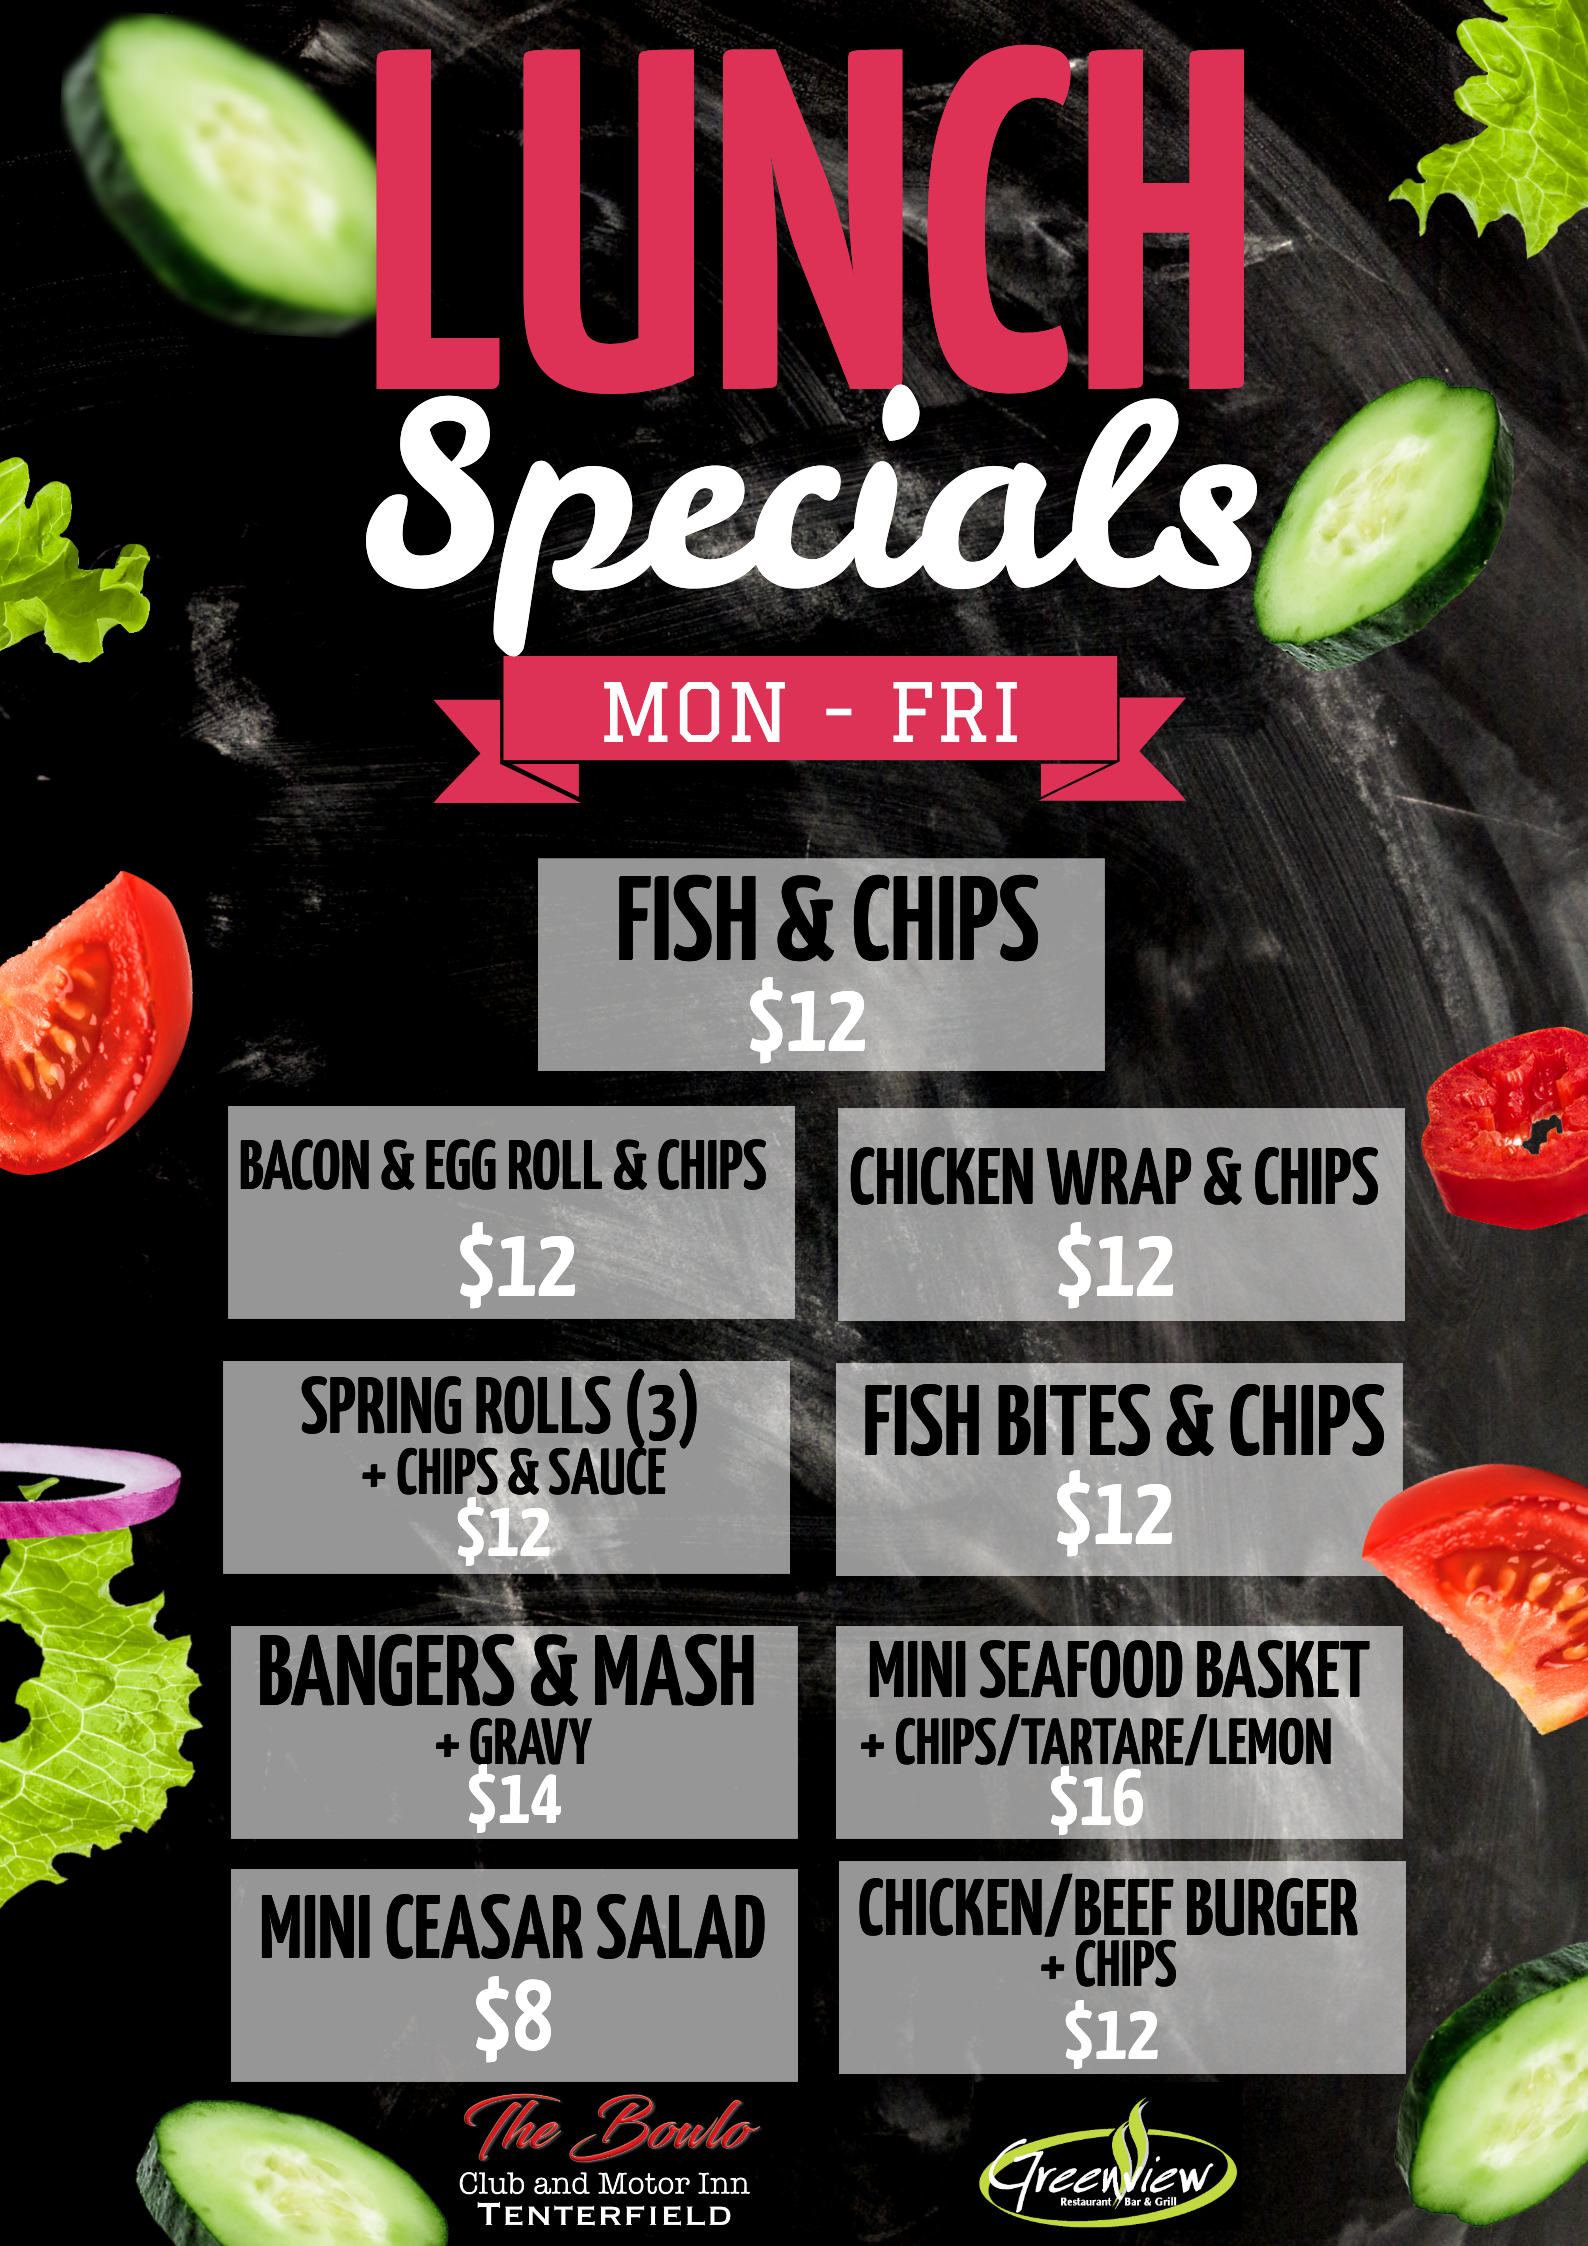 LUNCH SPECIALS!